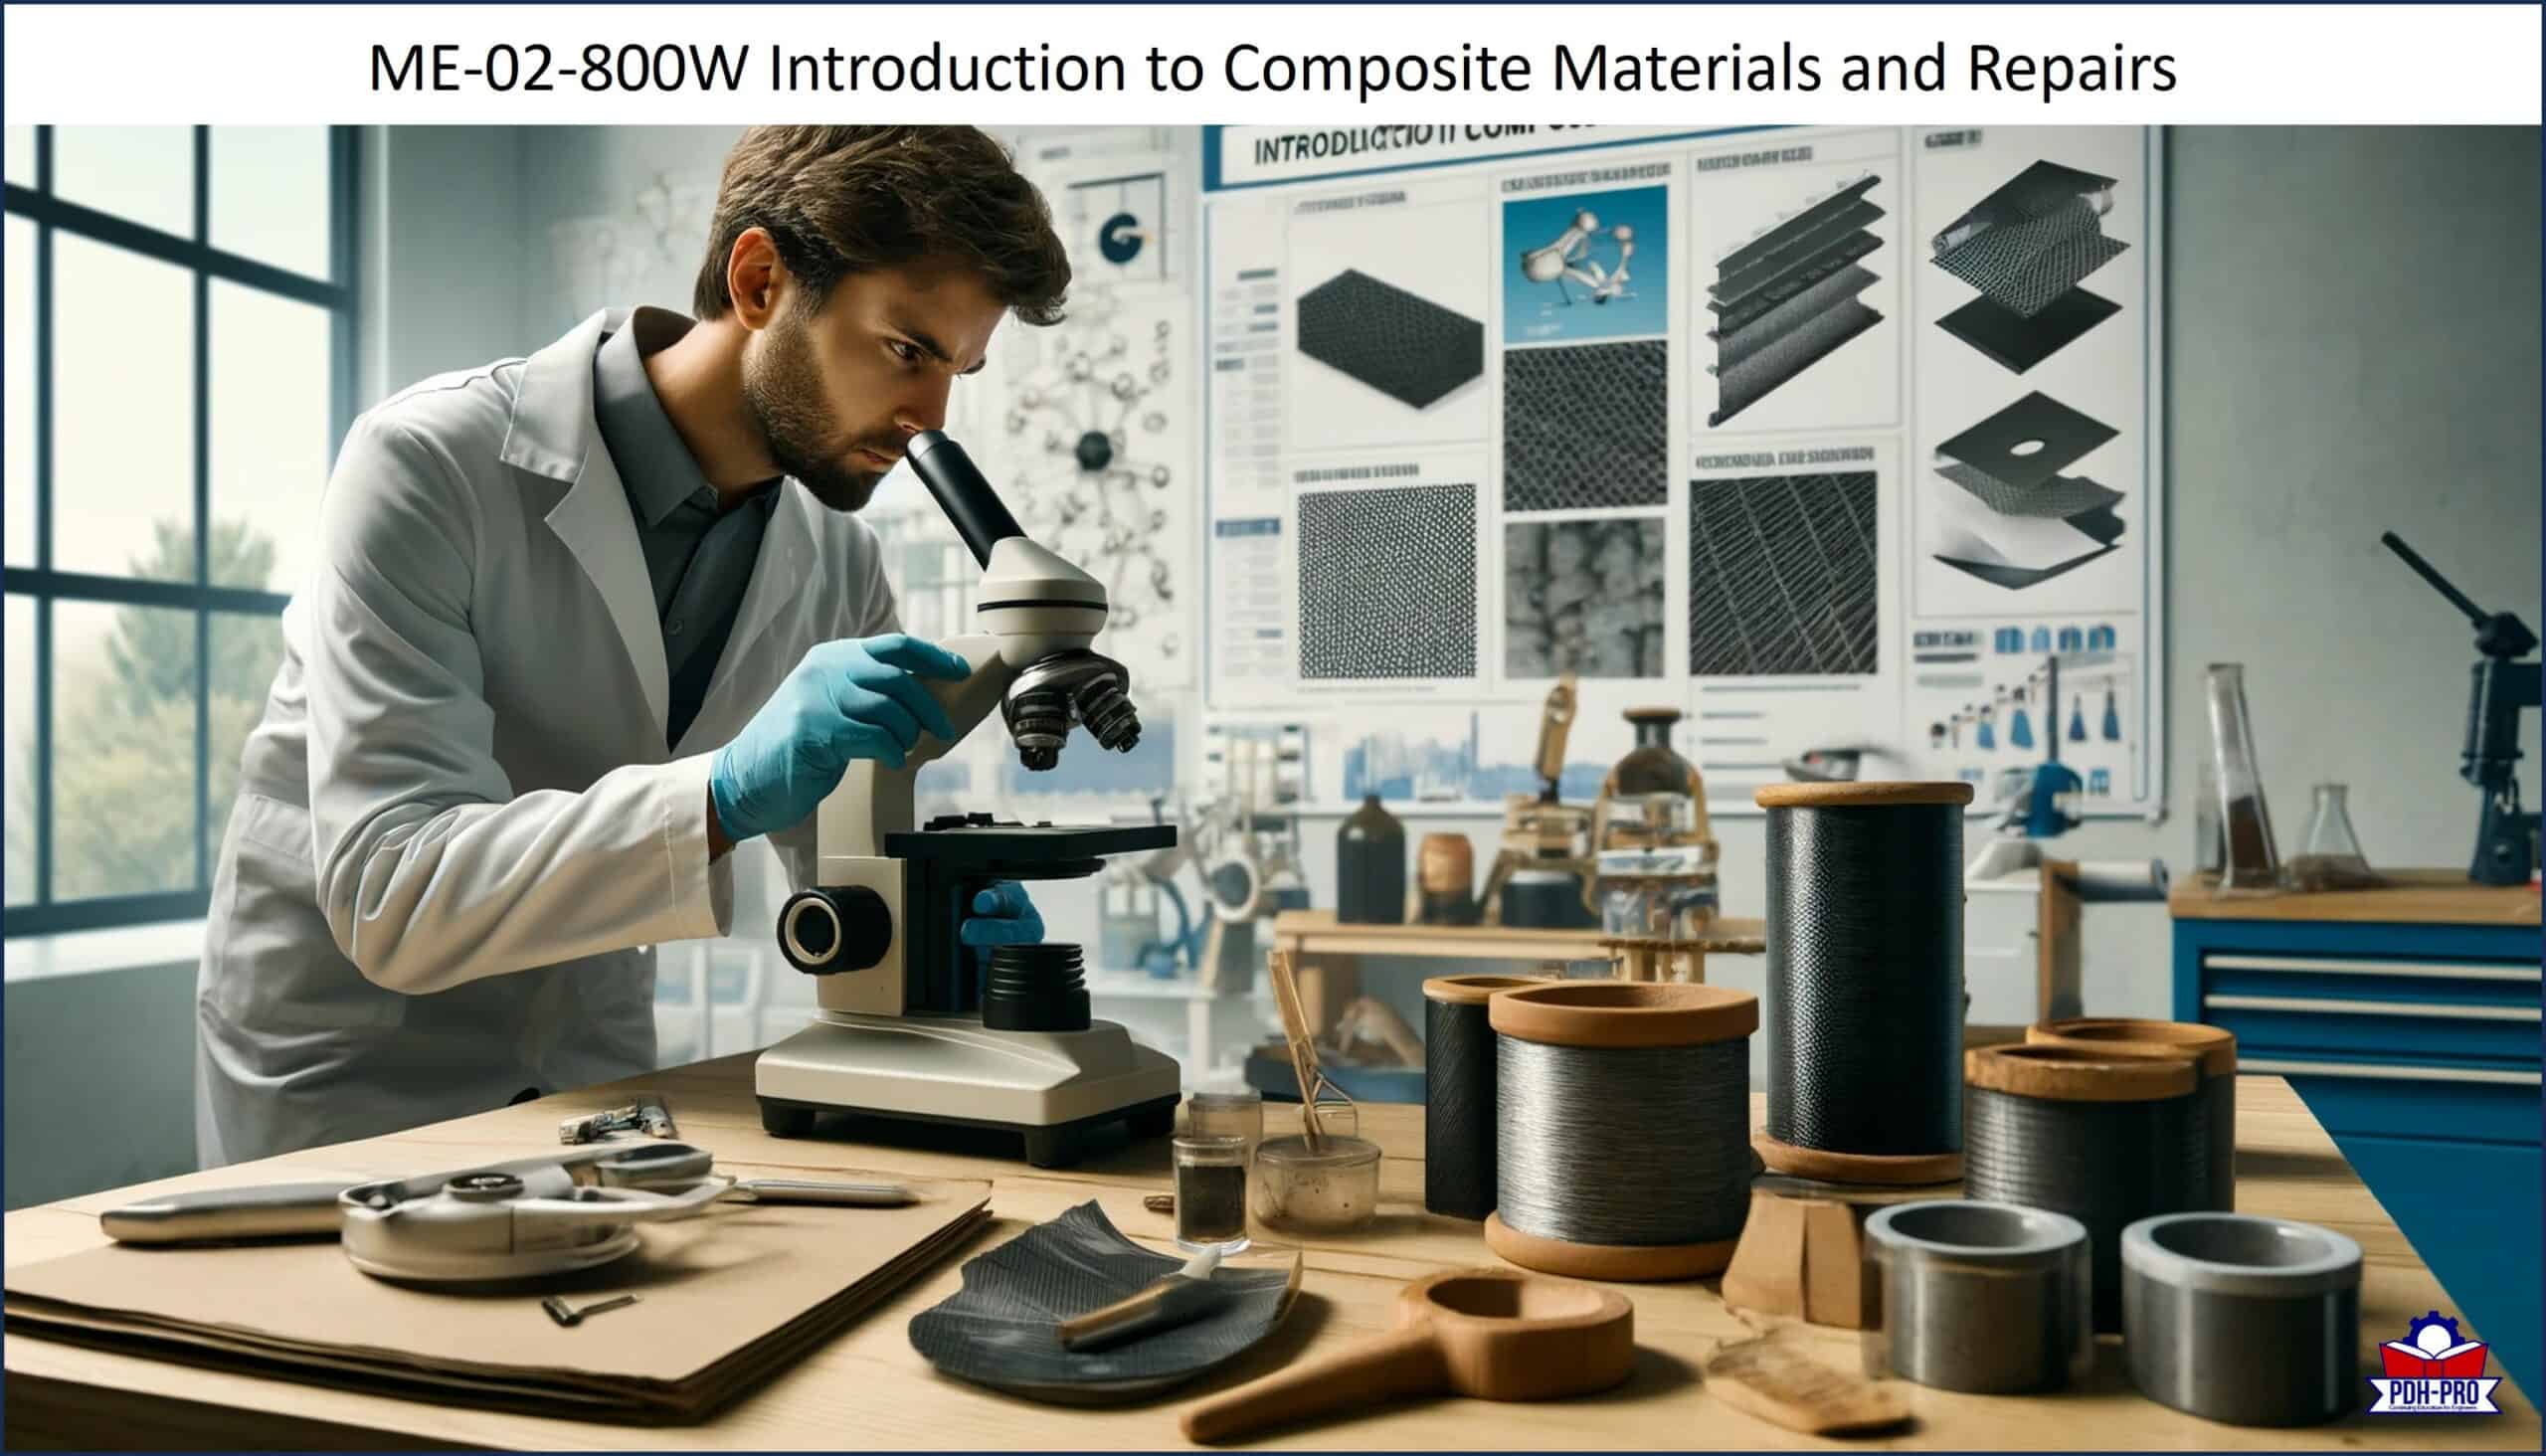 Introduction to Composite Materials and Repairs